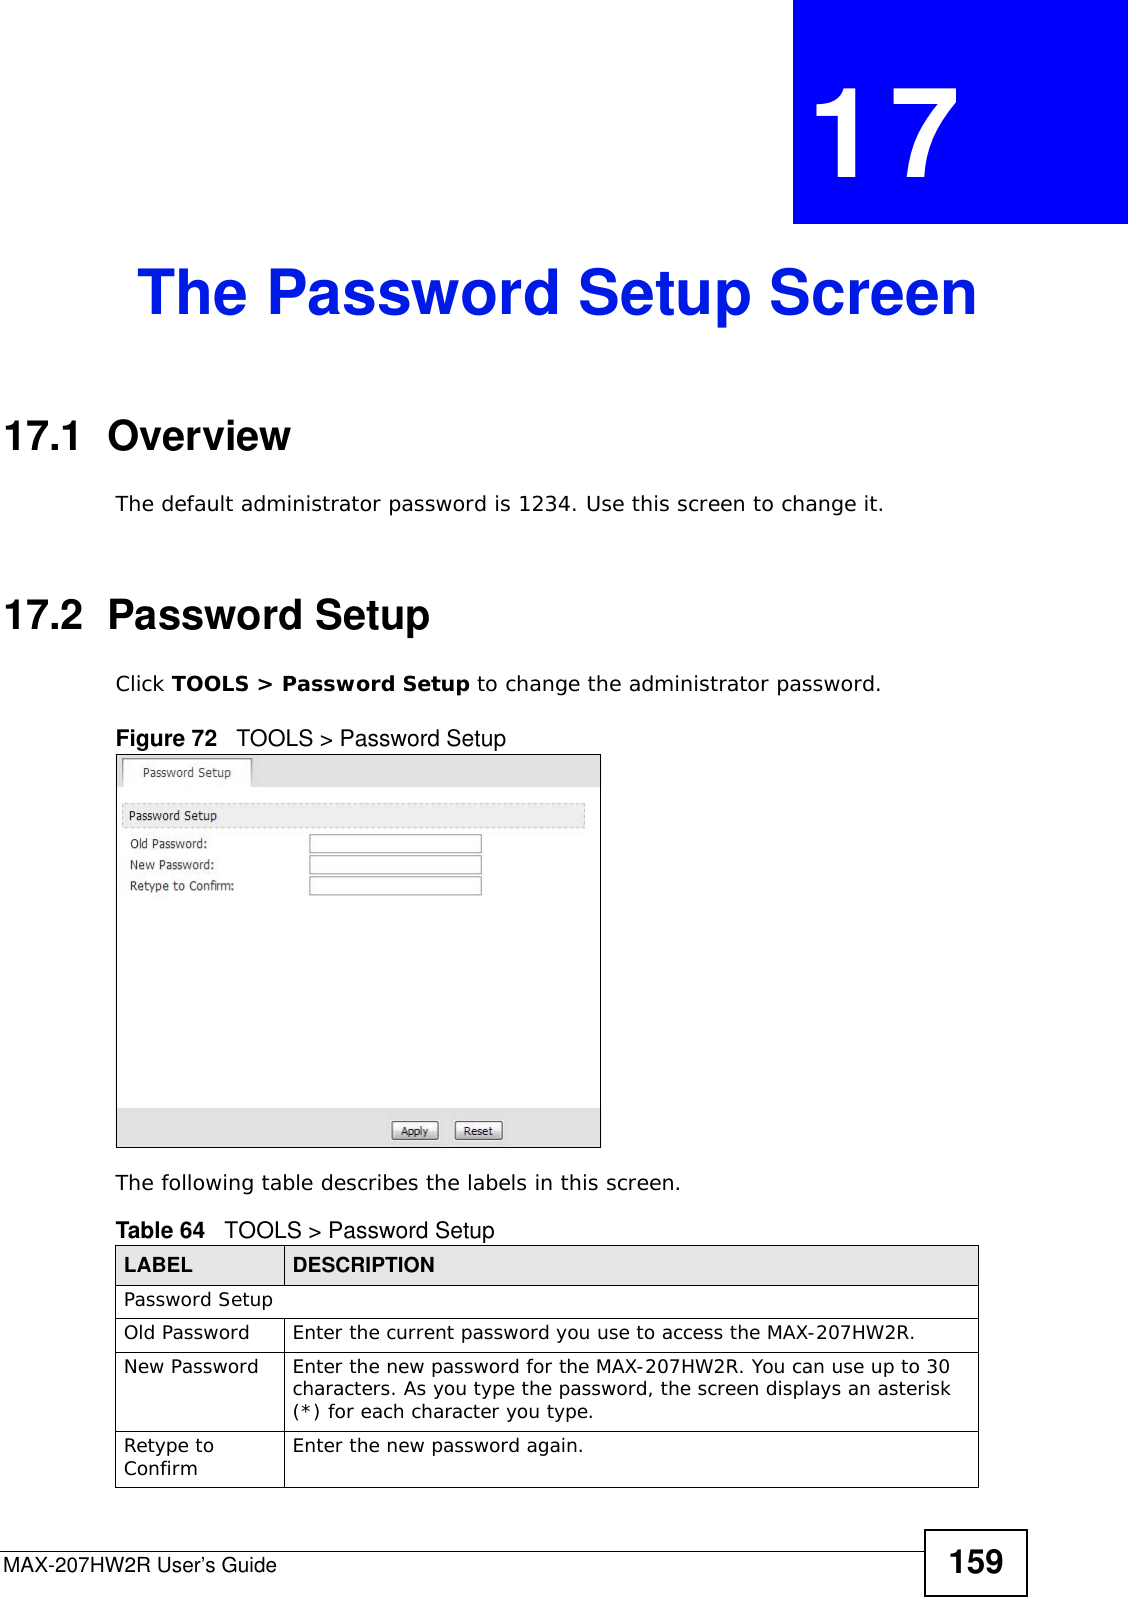 MAX-207HW2R User’s Guide 159CHAPTER  17 The Password Setup Screen17.1  OverviewThe default administrator password is 1234. Use this screen to change it.17.2  Password SetupClick TOOLS &gt; Password Setup to change the administrator password.Figure 72   TOOLS &gt; Password SetupThe following table describes the labels in this screen.Table 64   TOOLS &gt; Password SetupLABEL DESCRIPTIONPassword SetupOld Password Enter the current password you use to access the MAX-207HW2R.New Password Enter the new password for the MAX-207HW2R. You can use up to 30 characters. As you type the password, the screen displays an asterisk (*) for each character you type.Retype to Confirm  Enter the new password again.